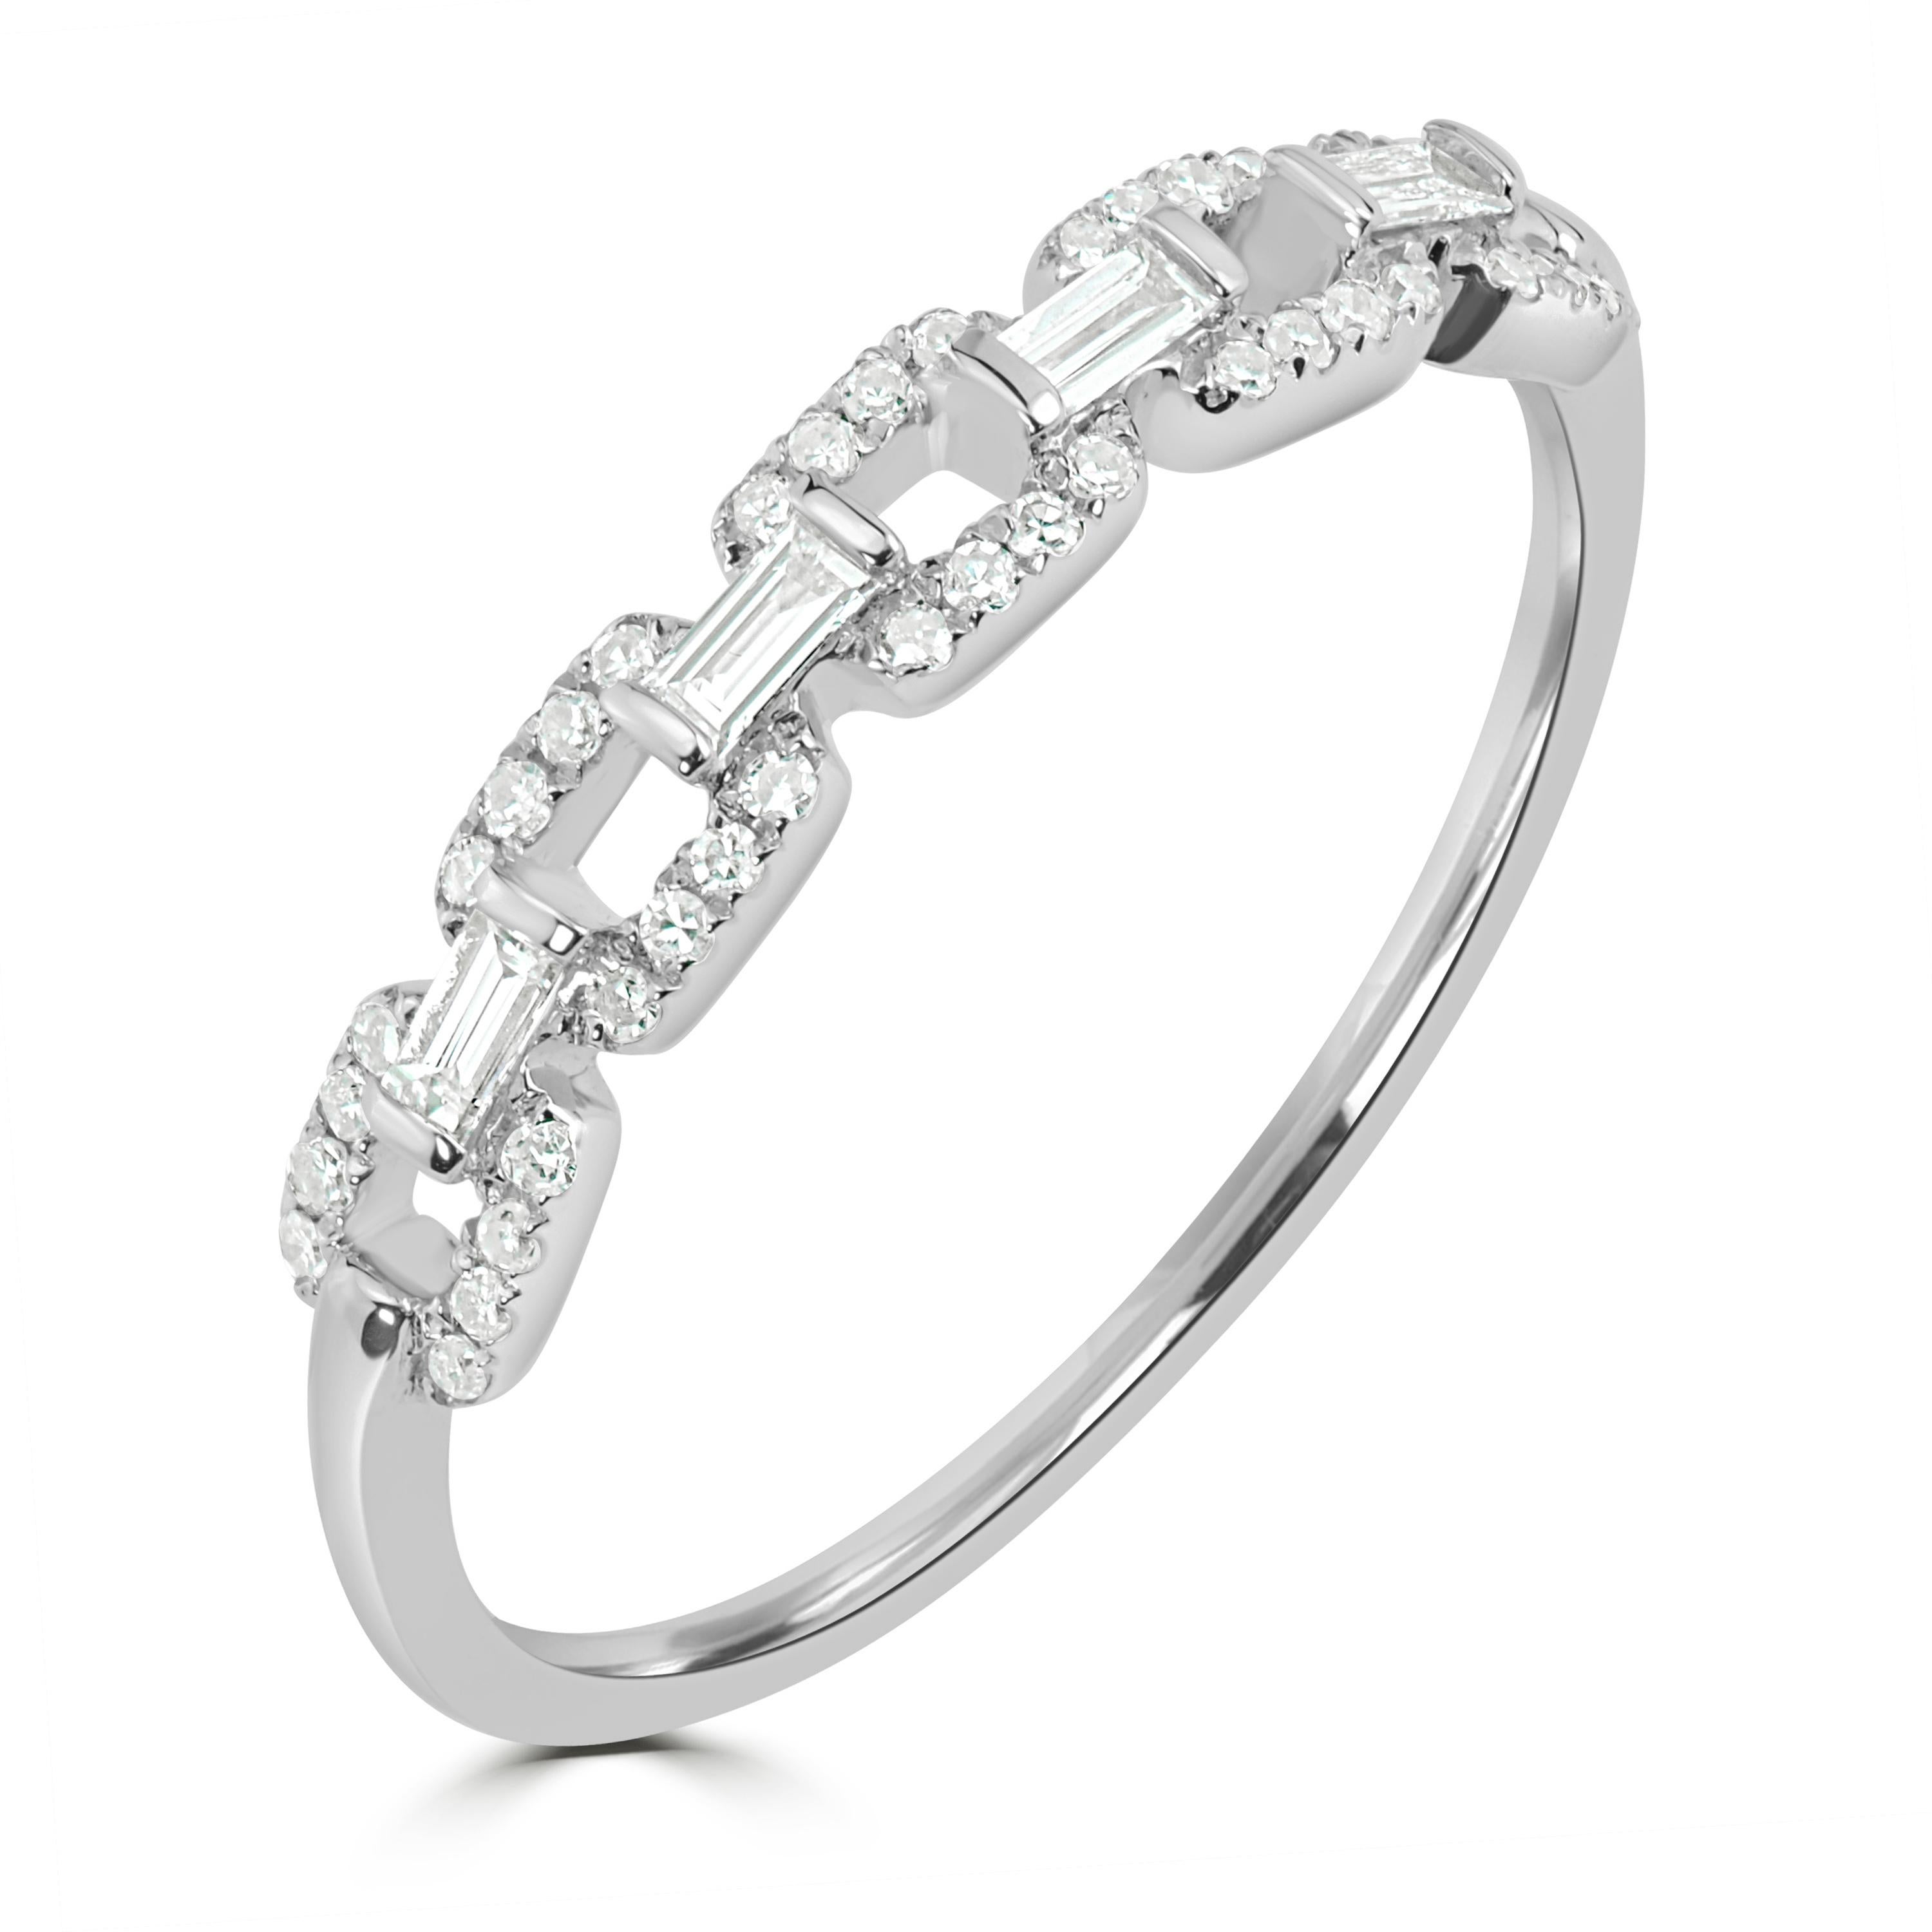 This Luxle classic ring showcases an openwork design paved with baguette and round cut diamonds set in 14K white gold that would make a lovely choice for your anniversary or wedding band.

Please follow the Luxury Jewels storefront to view the